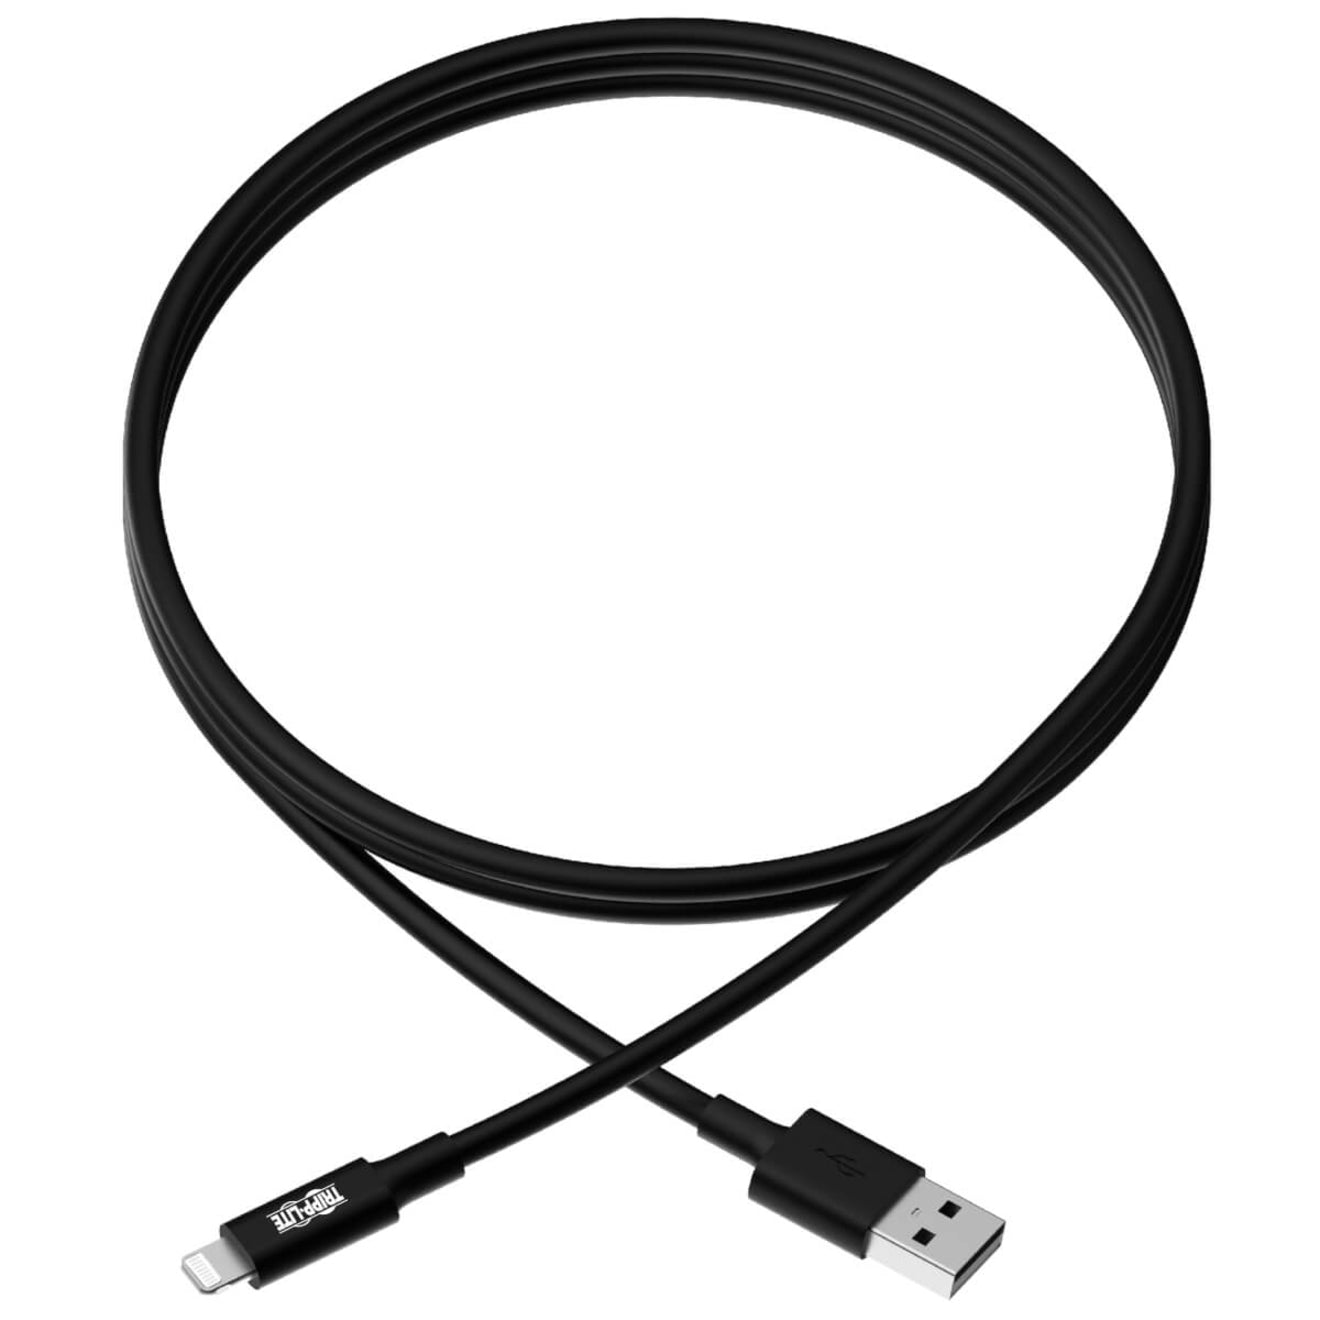 Tripp Lite M100-006-BK 6ft (1.8M) Black USB Sync / Charge Cable with Lightning Connector, Compatible with iPhone, iPad, iPod, MFI Certified